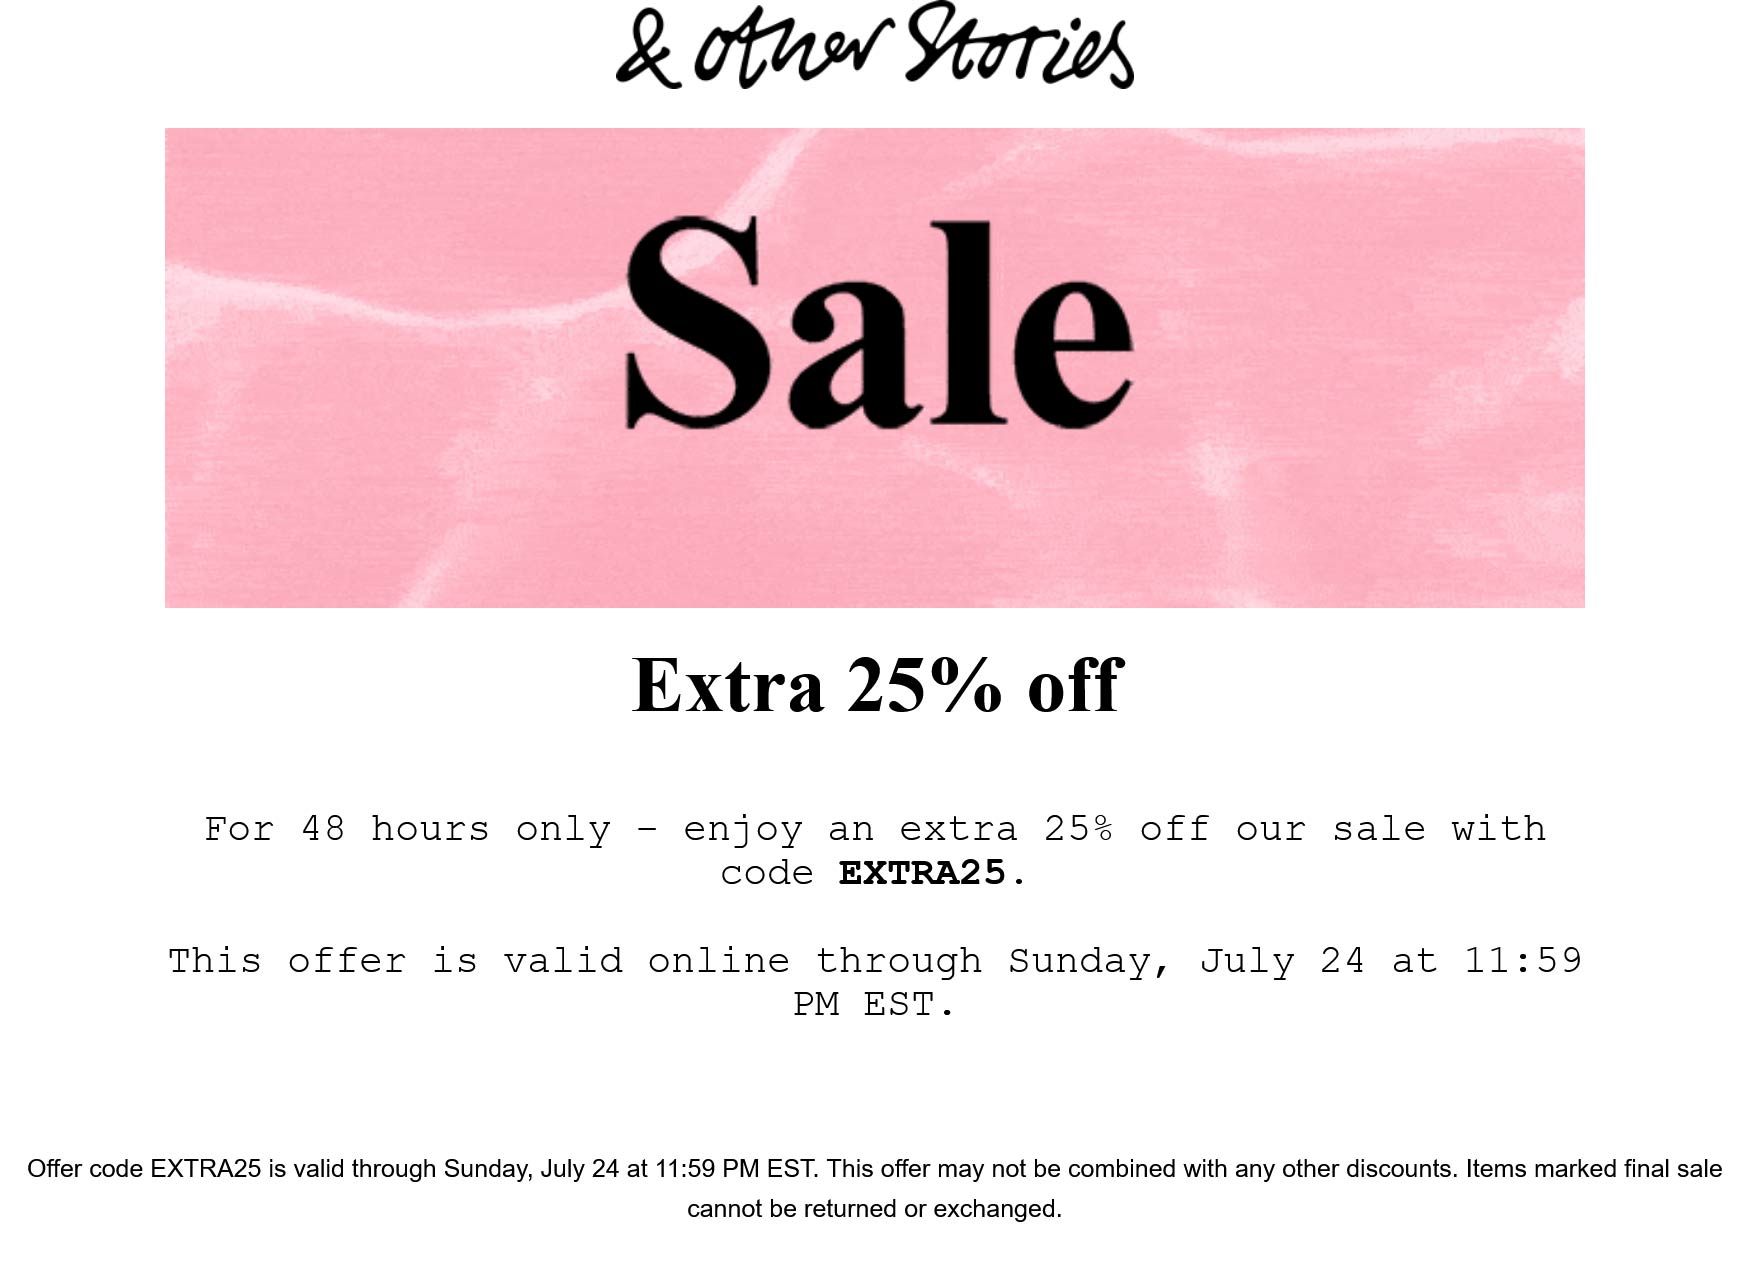 & Other Stories stores Coupon  Extra 25% off sale items at & Other Stories via promo code EXTRA25 #otherstories 